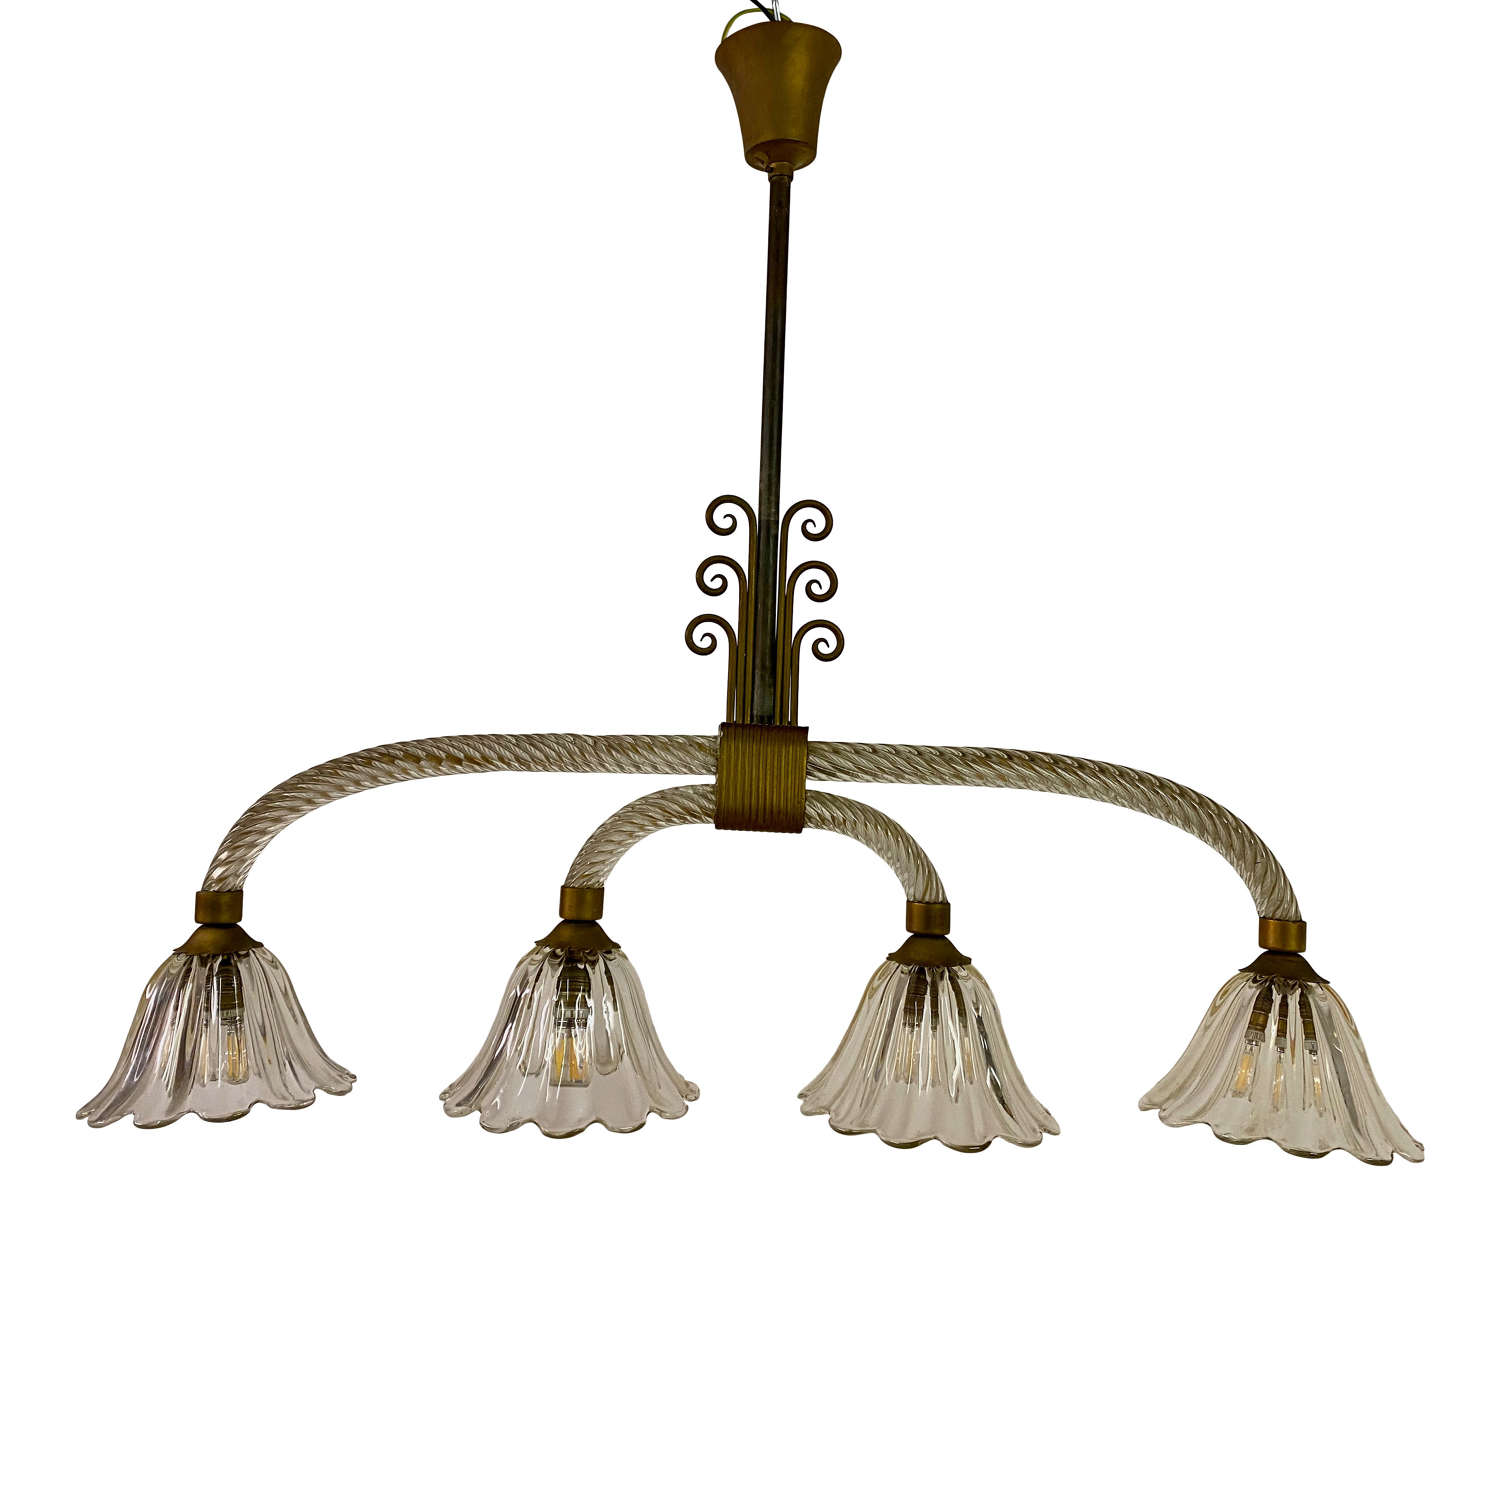 Four Light Murano Chandelier attributed to Barovier and Toso